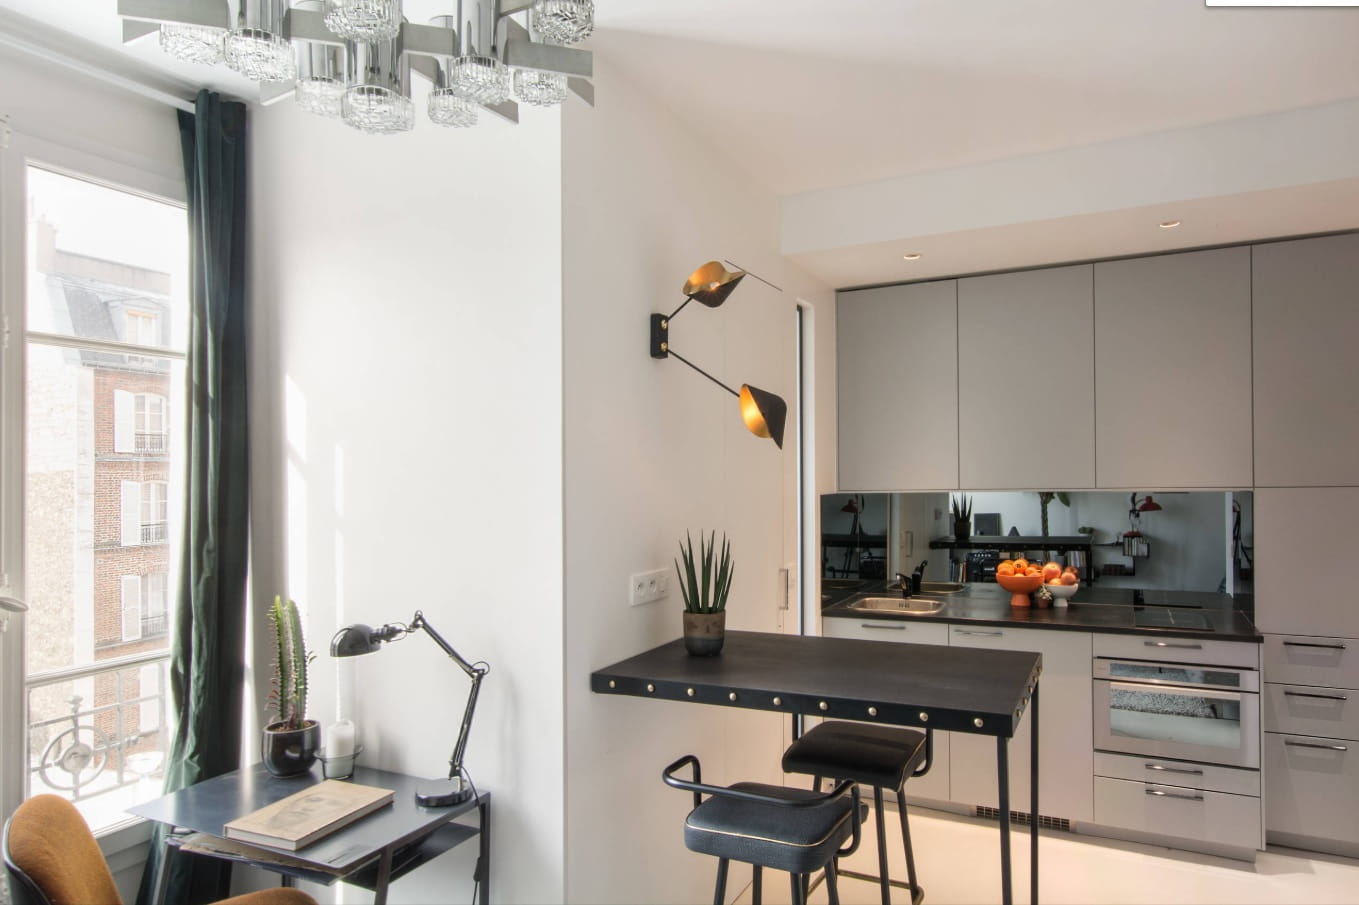 Overview of 10+ Biggest Home Design Trends in 2019 so Far. Complex lighting at modern kitchen